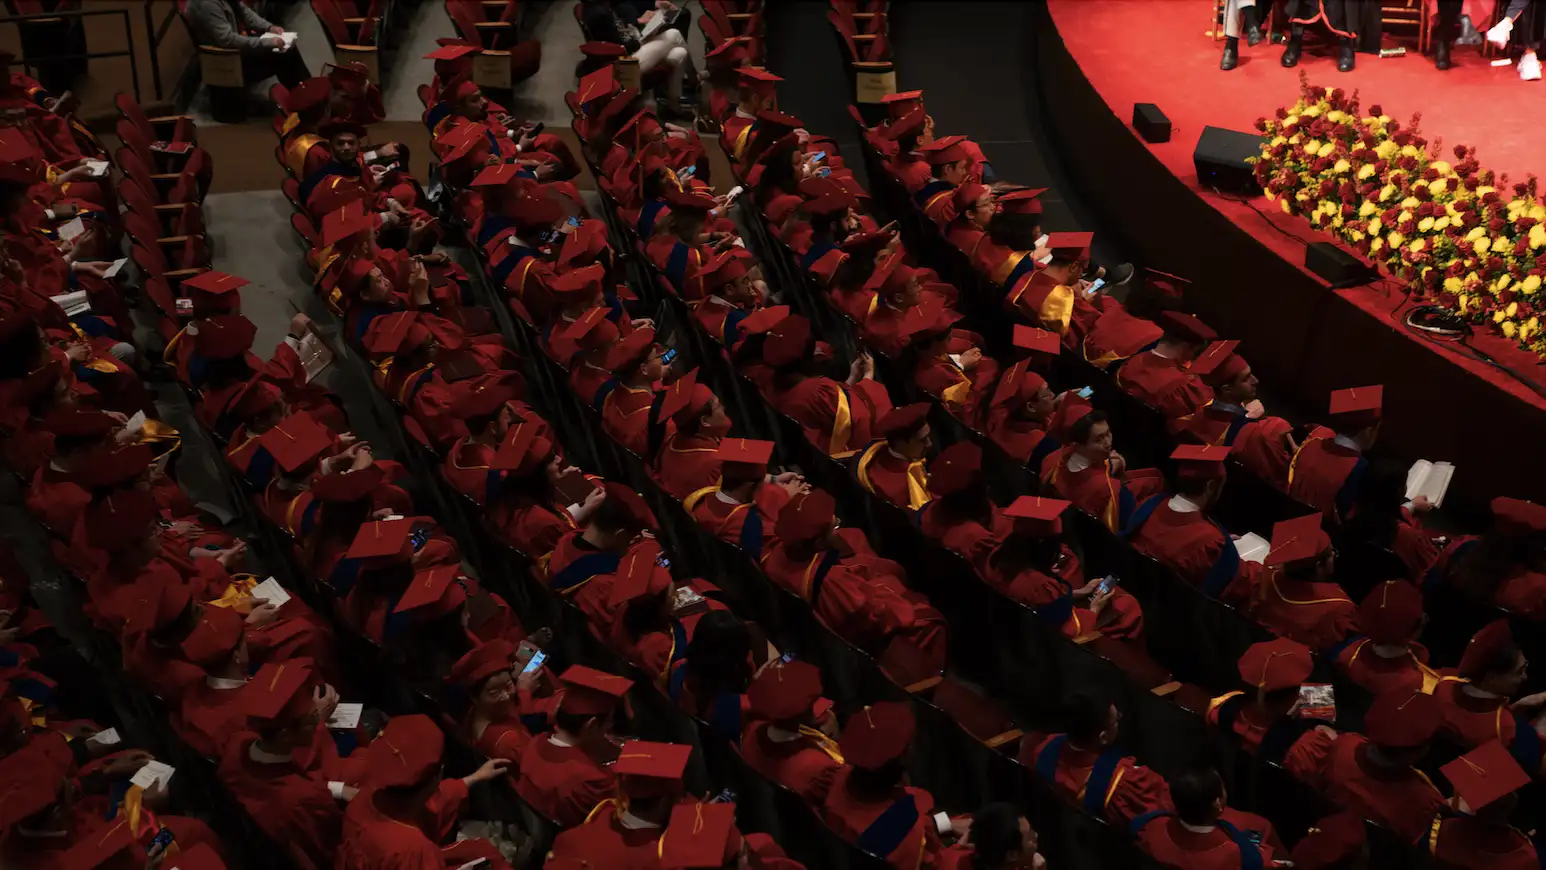 ICT’s Newly-Minted PhDs Participate in USC Viterbi School of Engineering “hooding” Ceremony